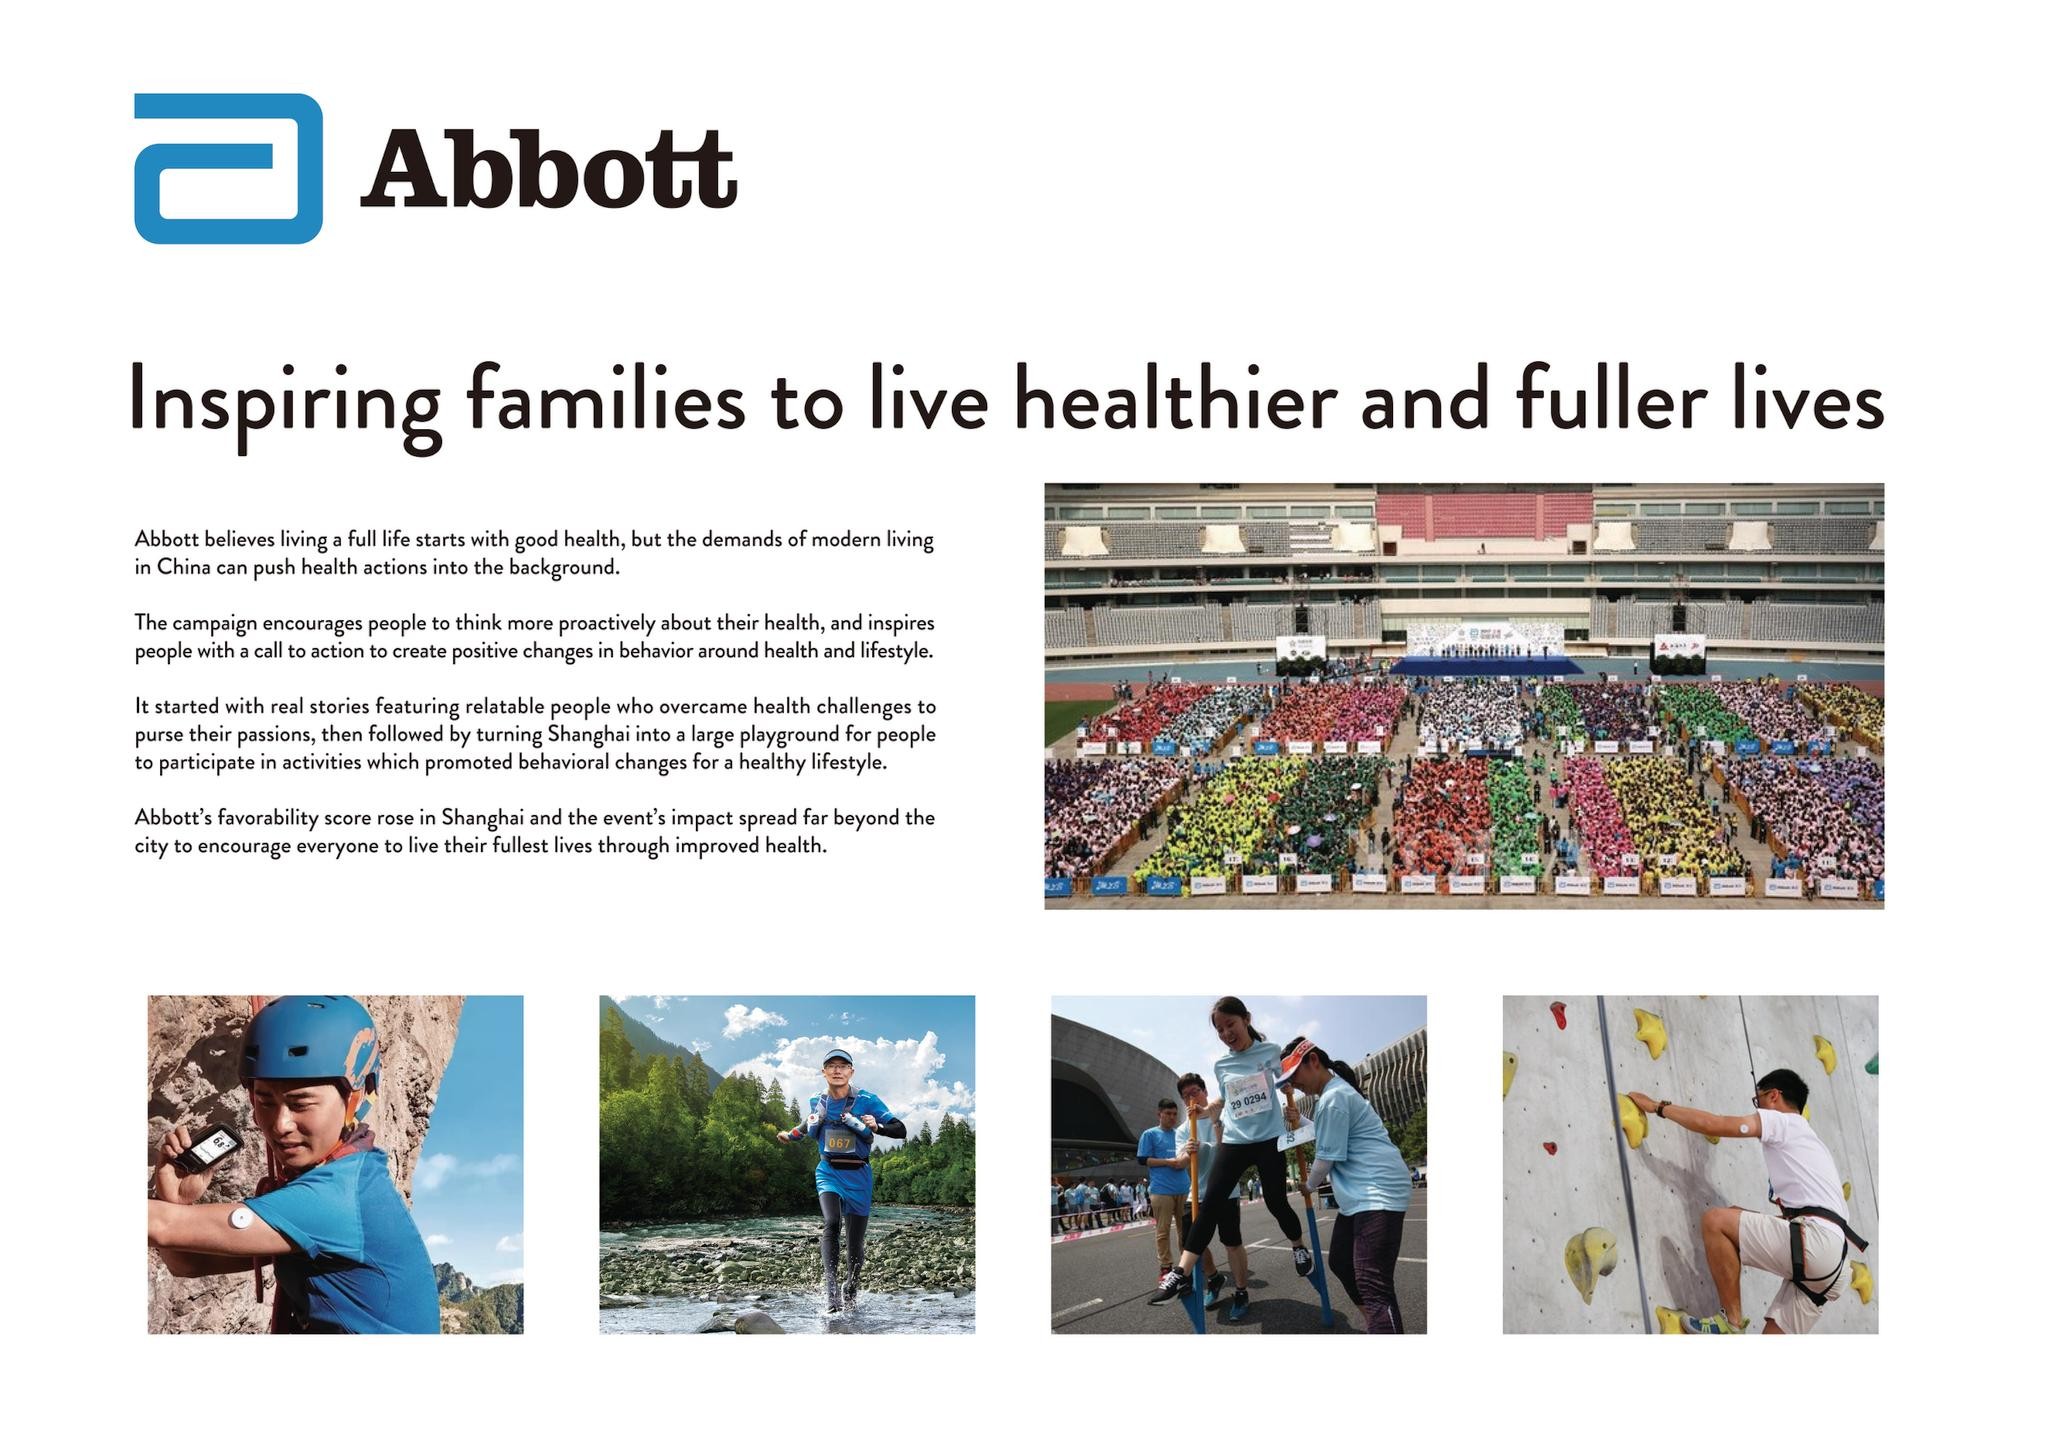 Inspire families to live healthier and fuller lives 